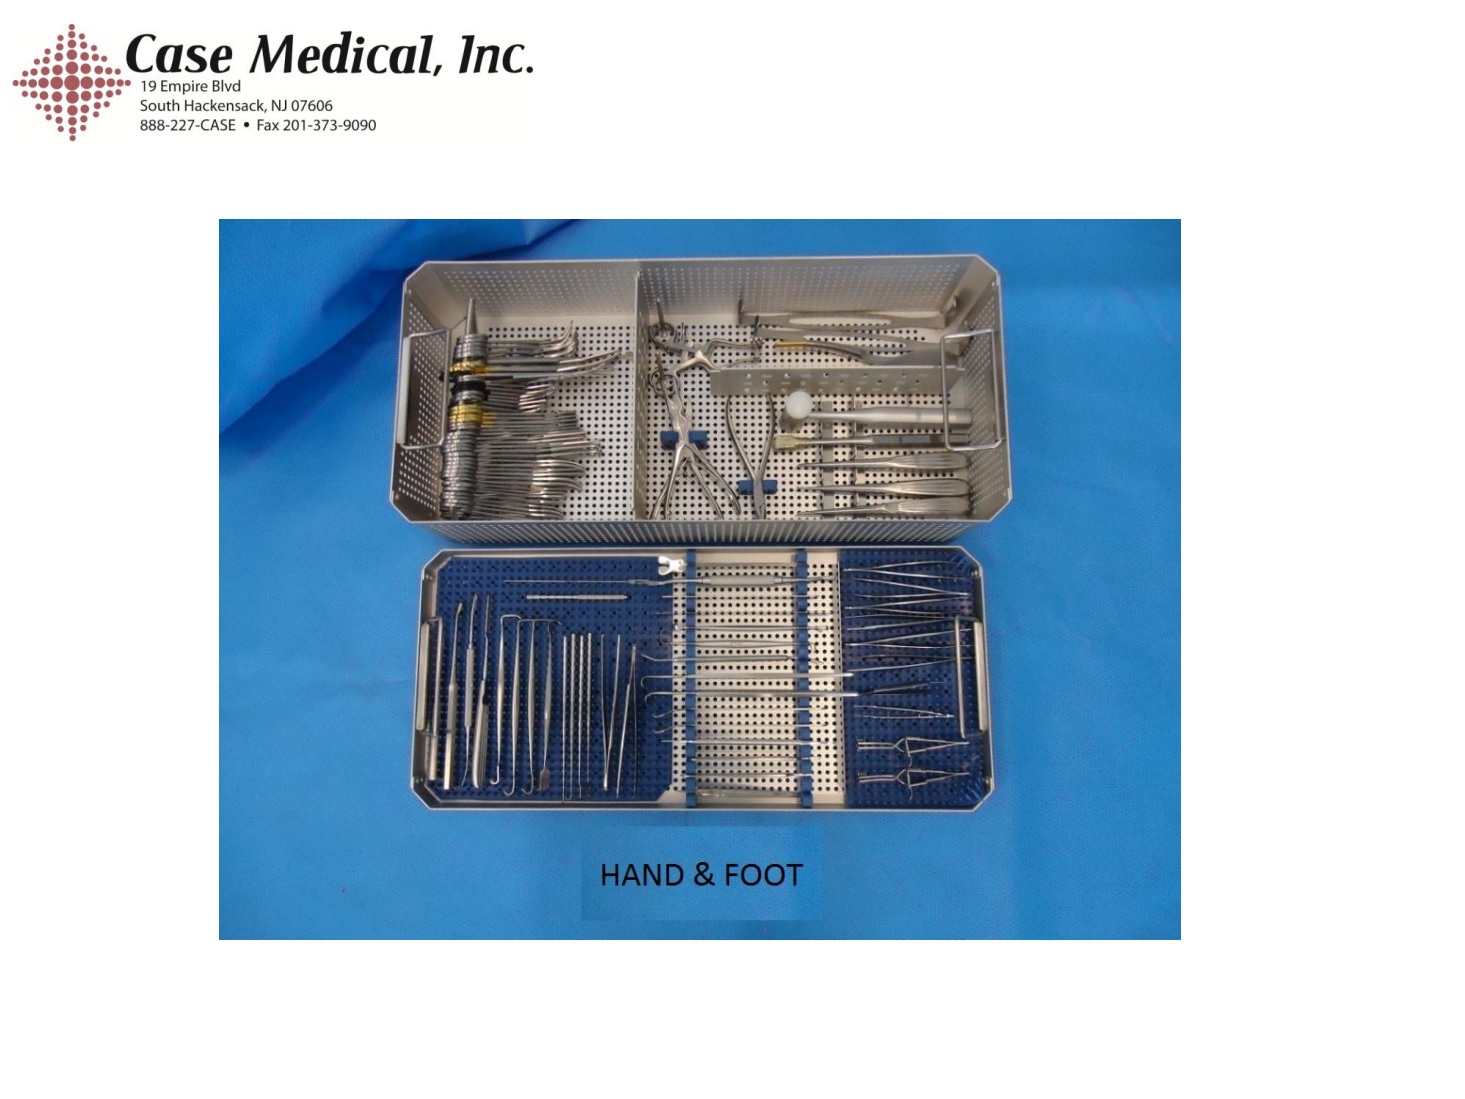 container-hand-foot-case-medical